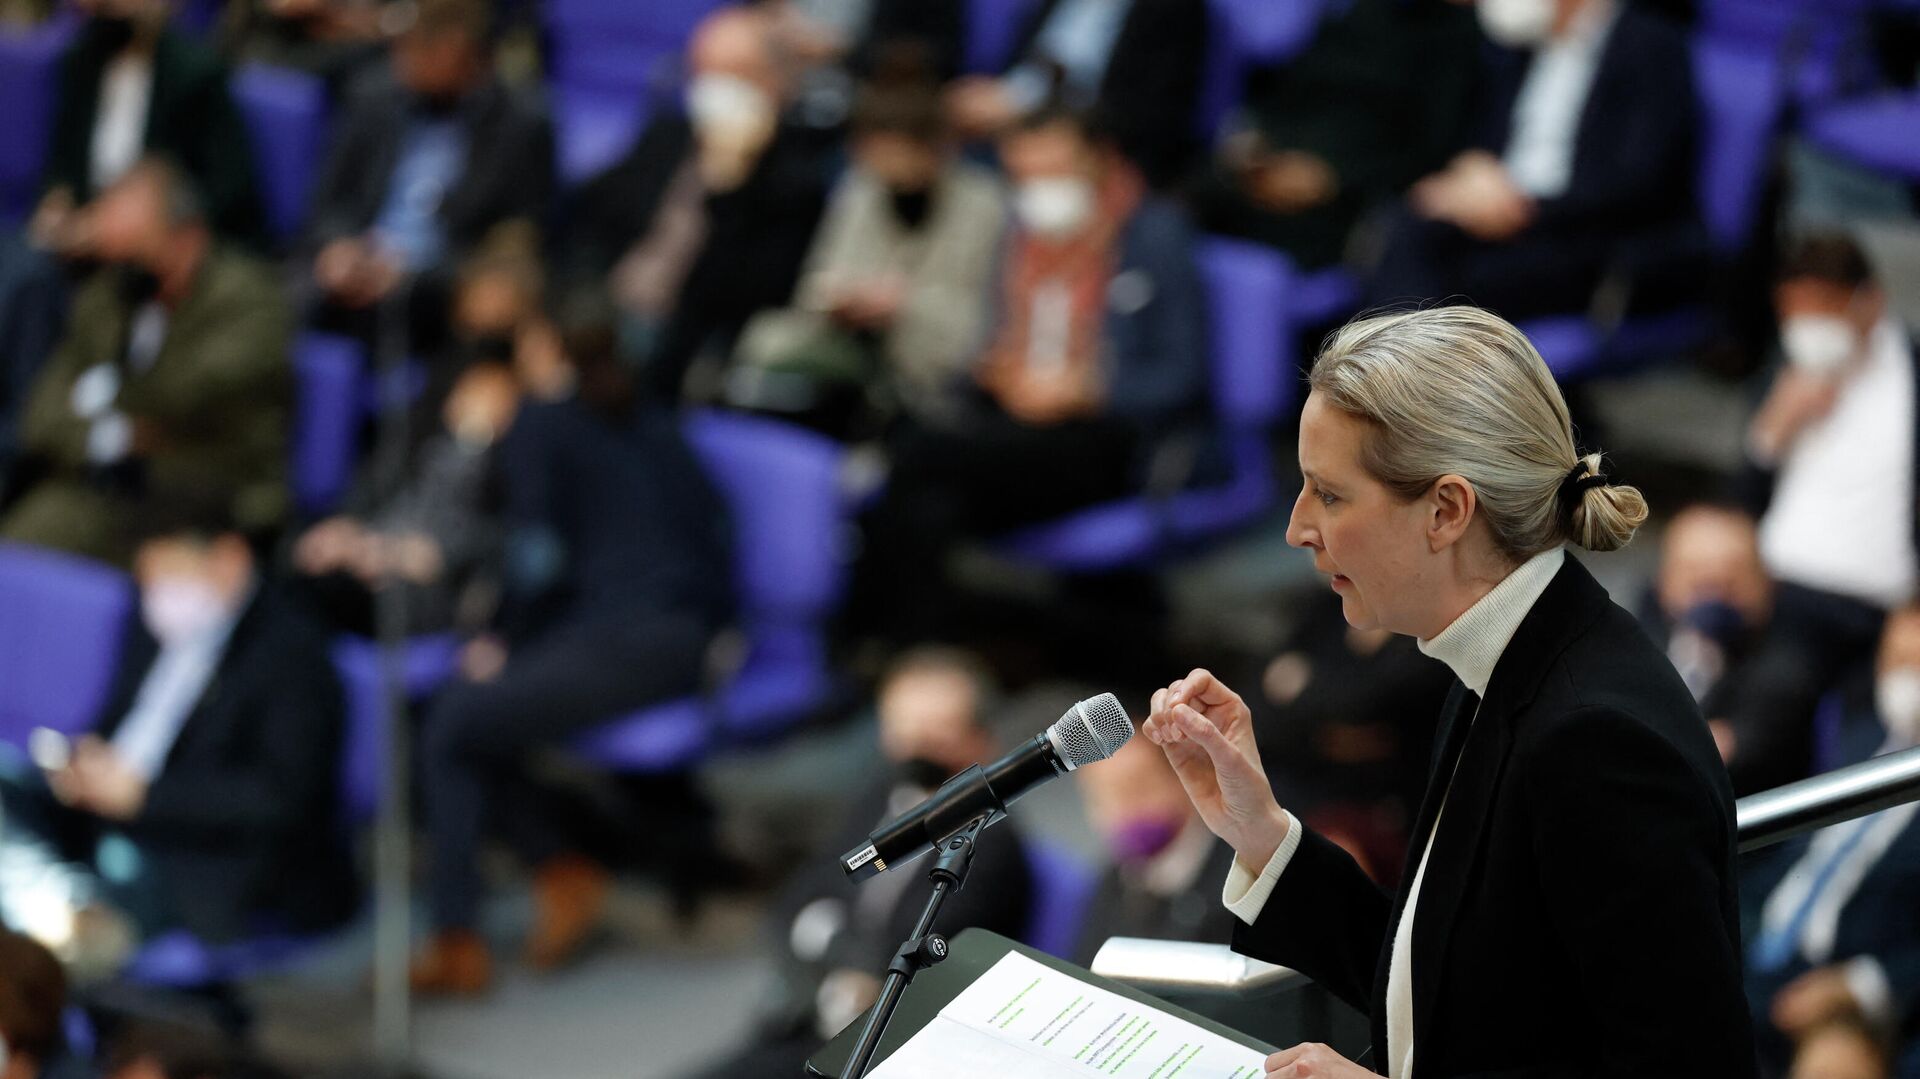 Parliamentary group co-leader of the far-right Alternative for Germany (AfD) party Alice Weidel speaks during an extraordinary session of the Bundestag (lower house of parliament) on February 27, 2022 in Berlin - Sputnik International, 1920, 01.03.2022